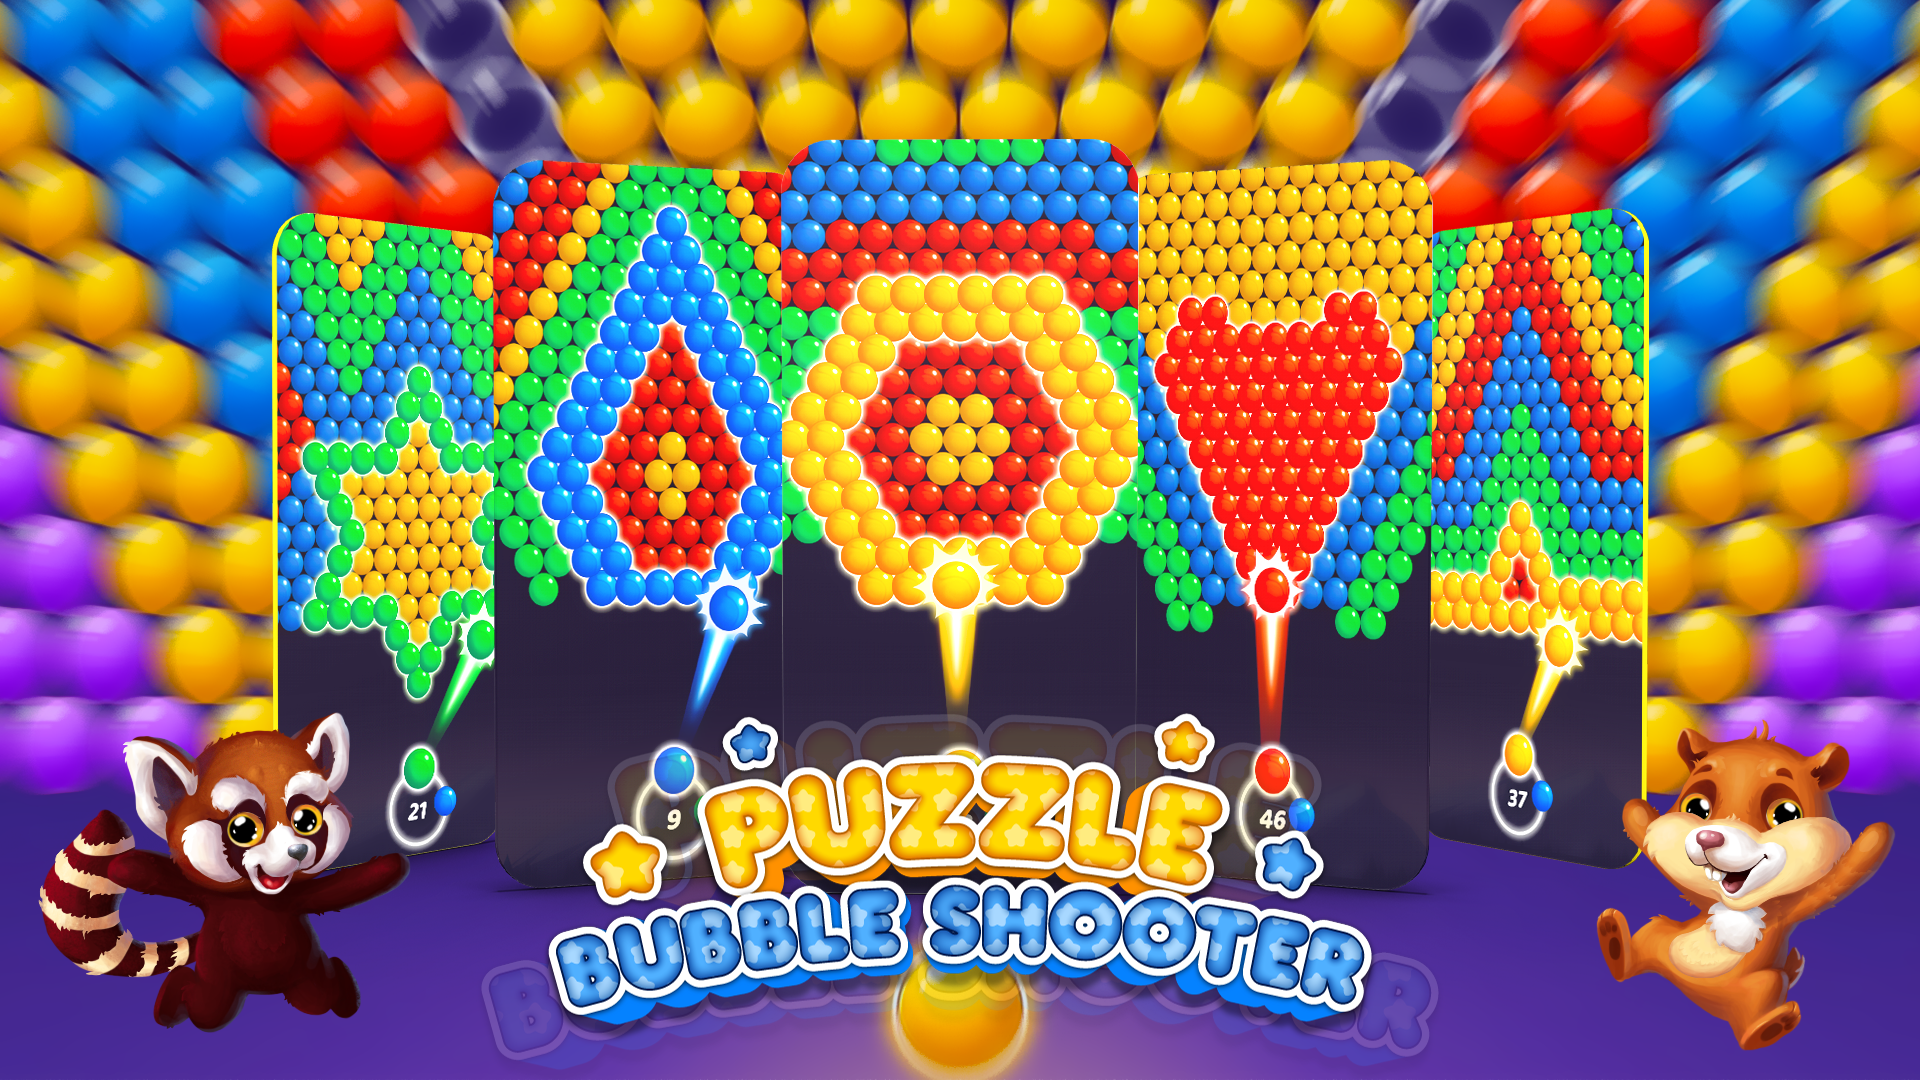 App Bubble Puzzle: Pop & Clear! Android game 2023 